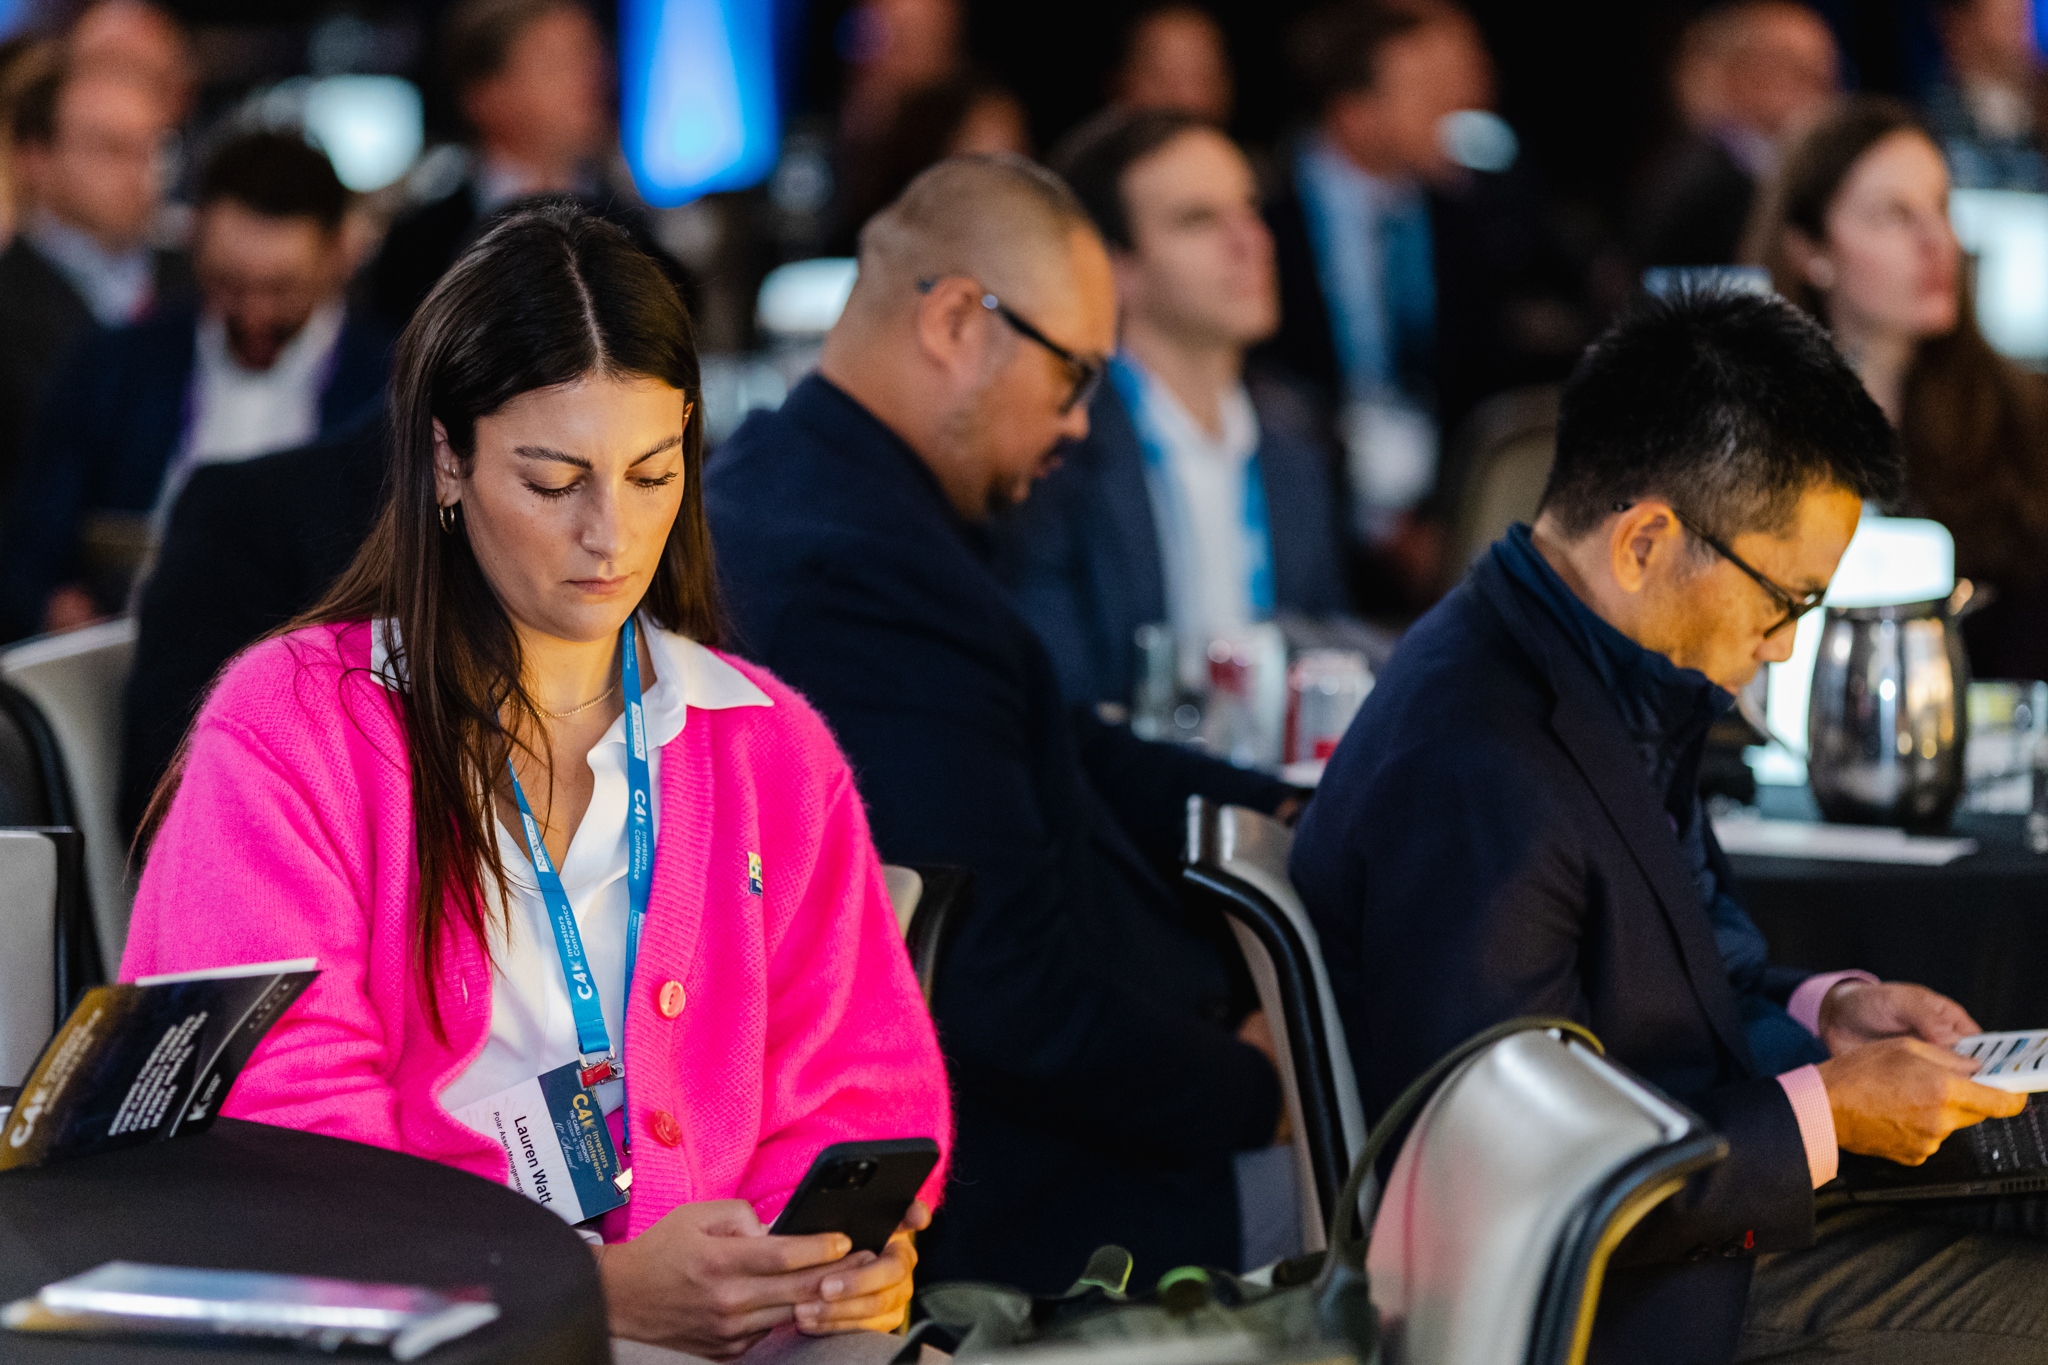 A group of people at a conference engrossed in their phones.